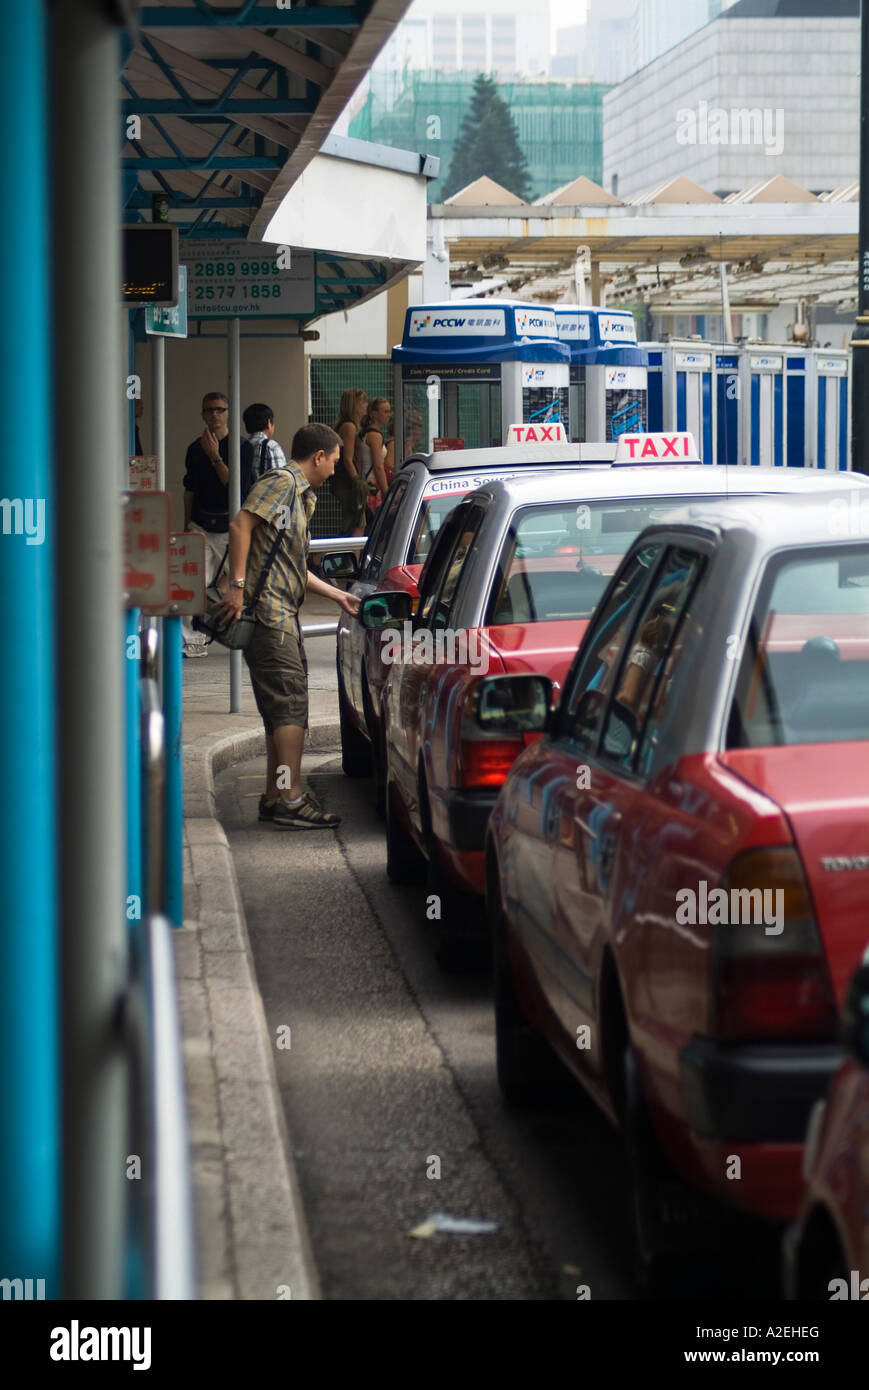 dh  CENTRAL HONG KONG Man opening door of taxi Star Ferry taxi rank queue taxicab cab line wait Stock Photo